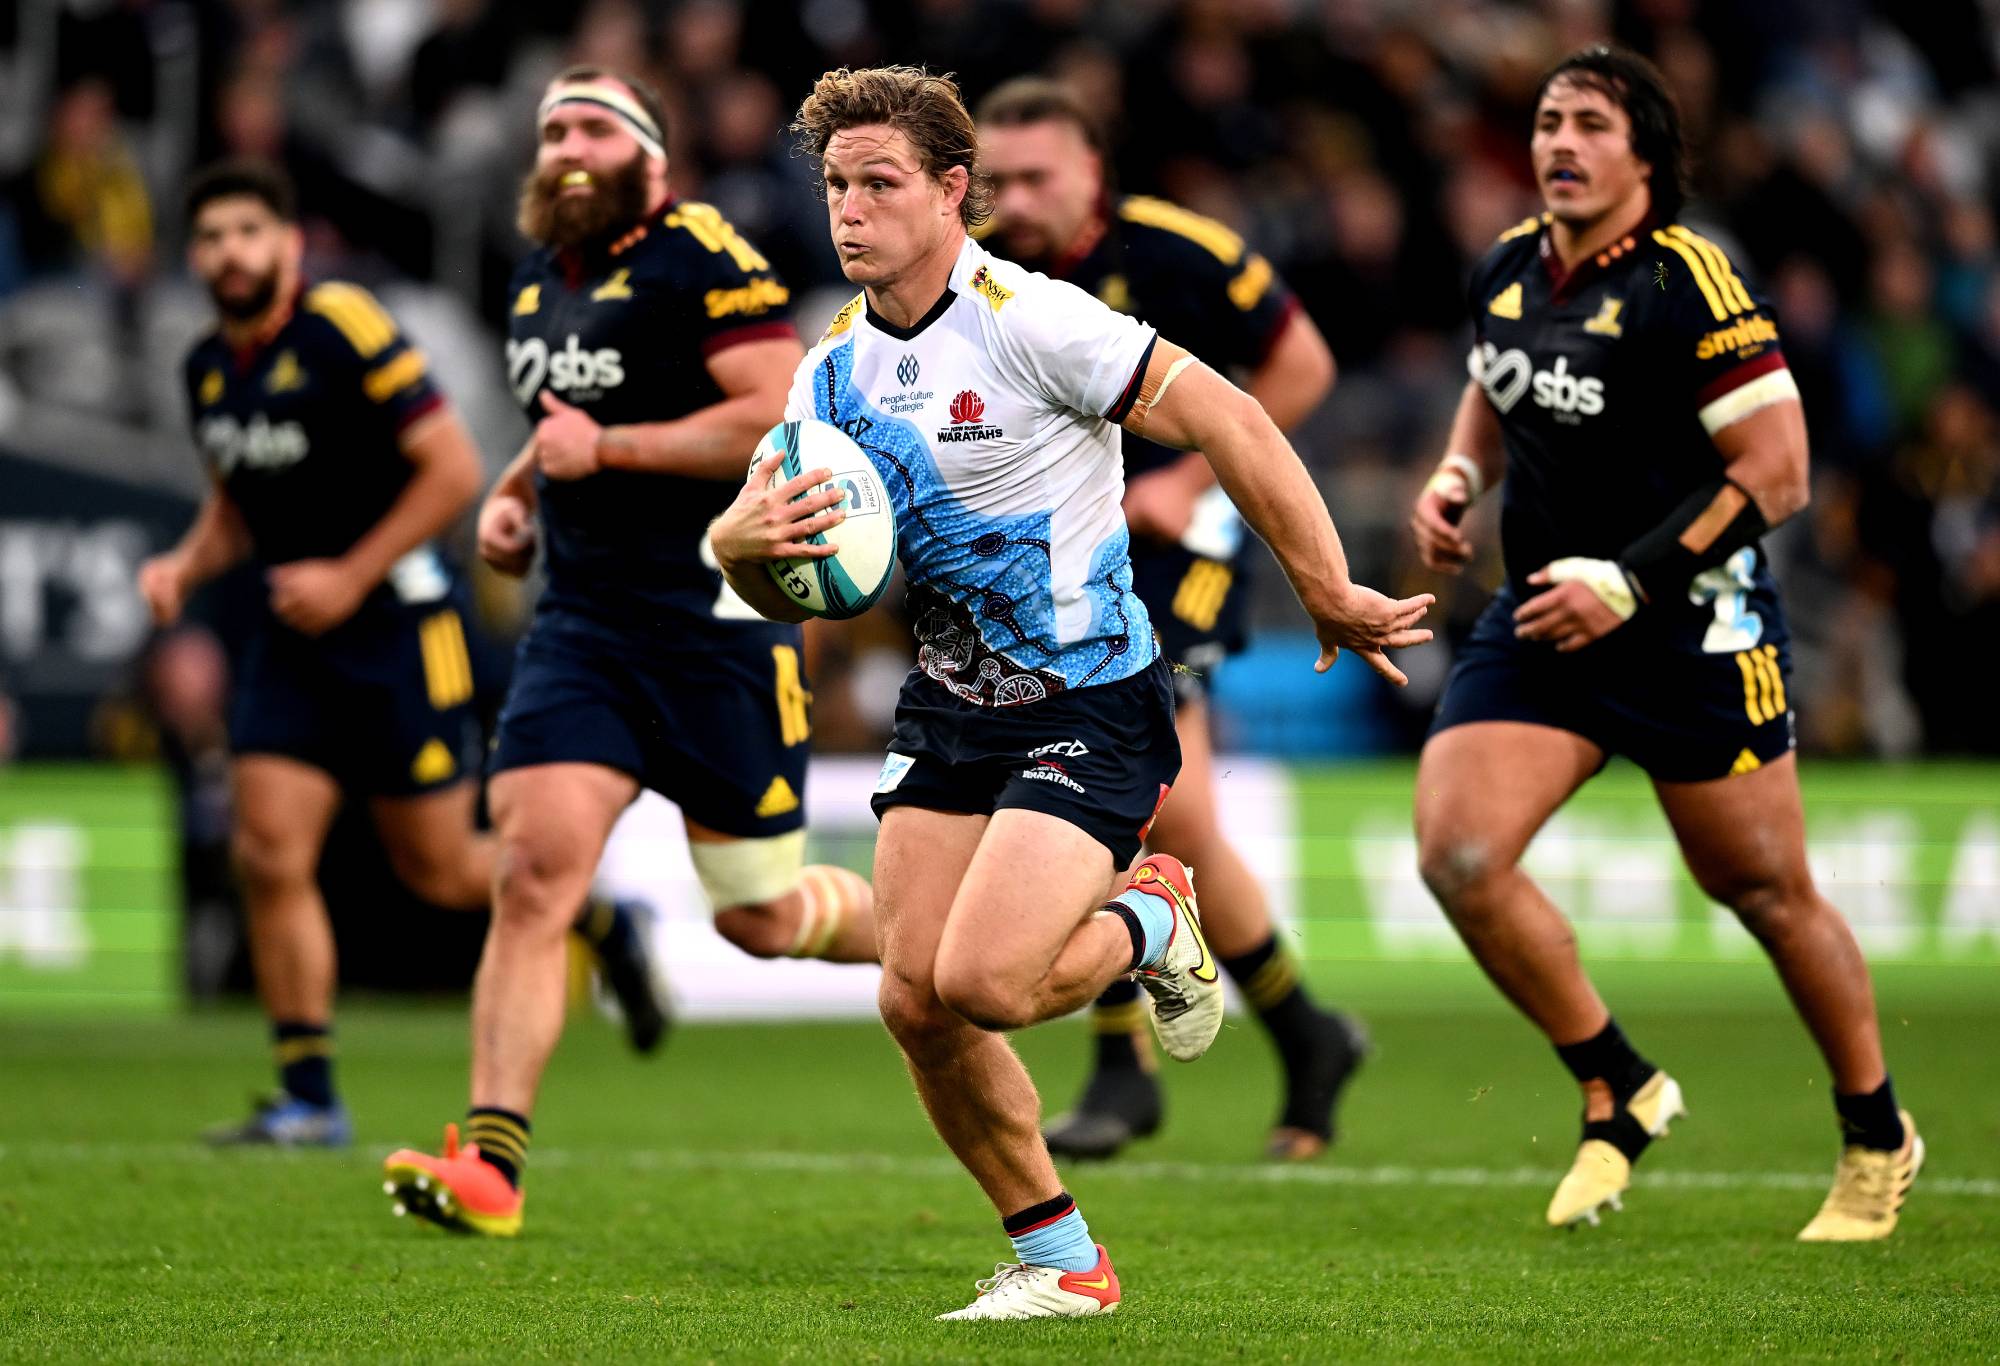 Michael Hooper of the Waratahs charges up field during the round 14 Super Rugby Pacific match between the Highlanders and the NSW Waratahs at Forsyth Barr Stadium on May 22, 2022 in Dunedin, New Zealand. (Photo by Joe Allison/Getty Images)